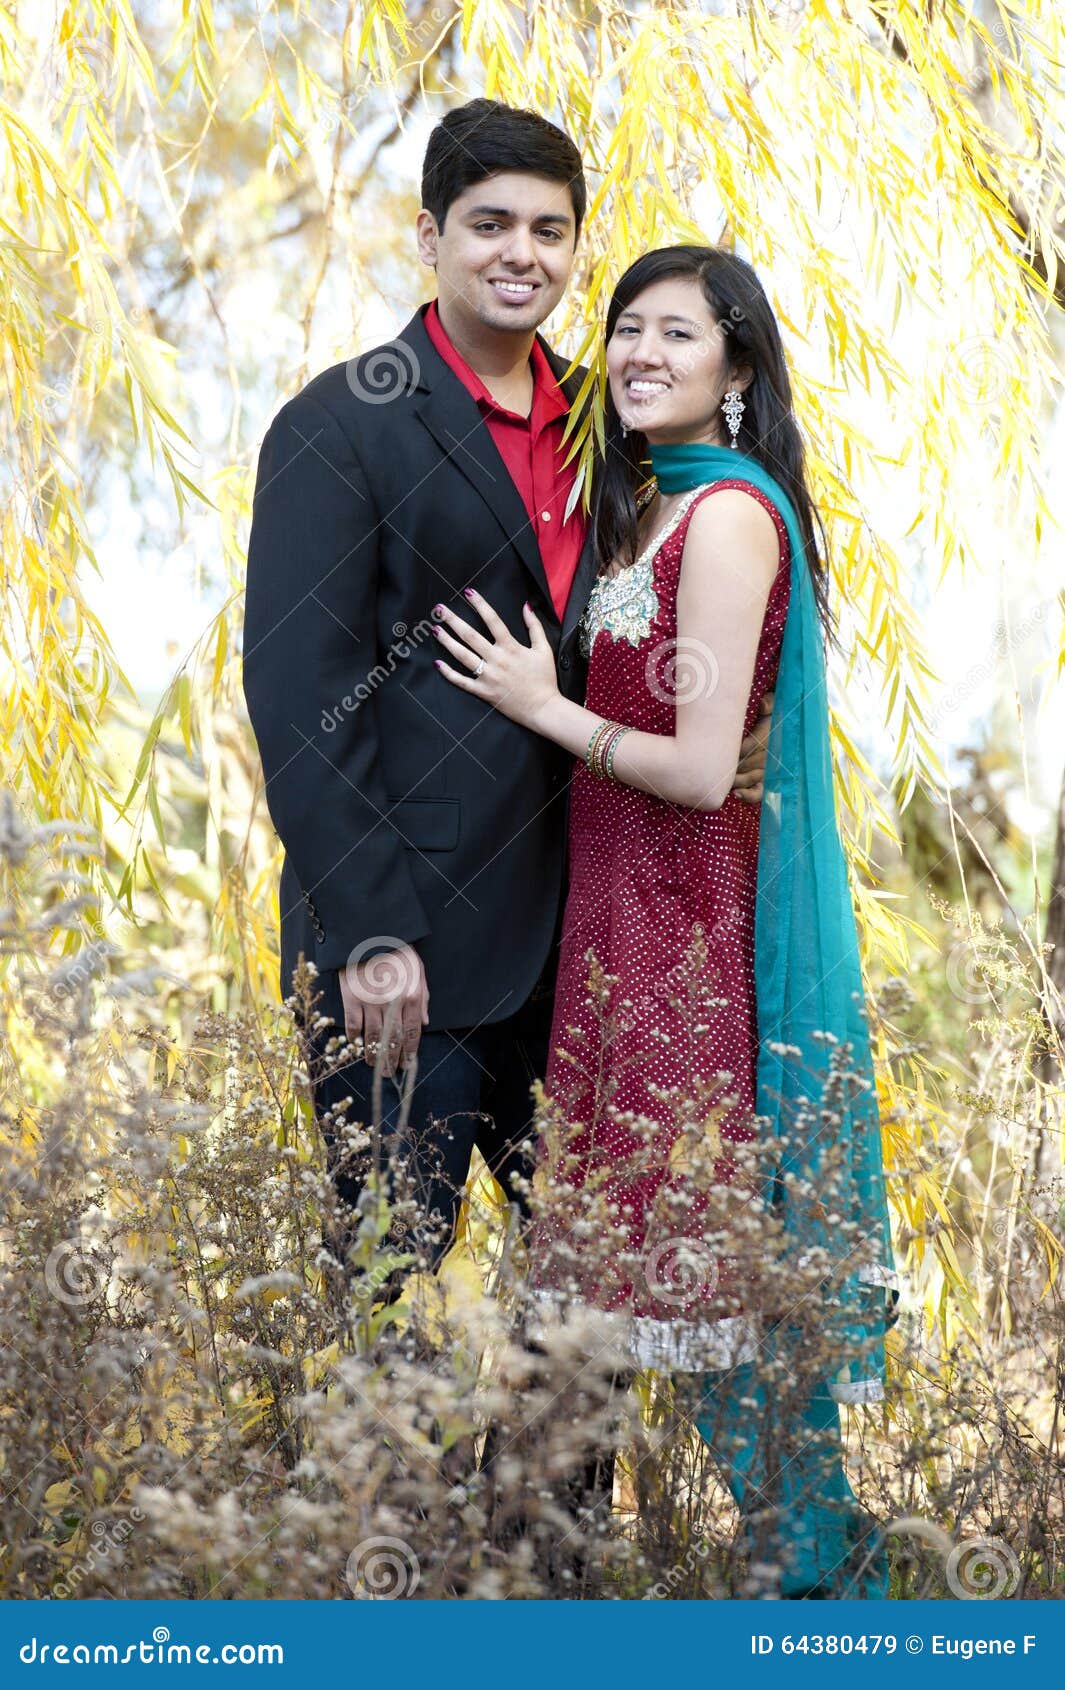 how to pose ,couple photoshoot ideas,photography tips, | pre wedding  photoshoot poses, wedding photography poses, Indian pre wedding photoshoot  ideas ,pre wedding photoshoot images ,pre wedding photoshoot... | By  Aythaan masharifFacebook